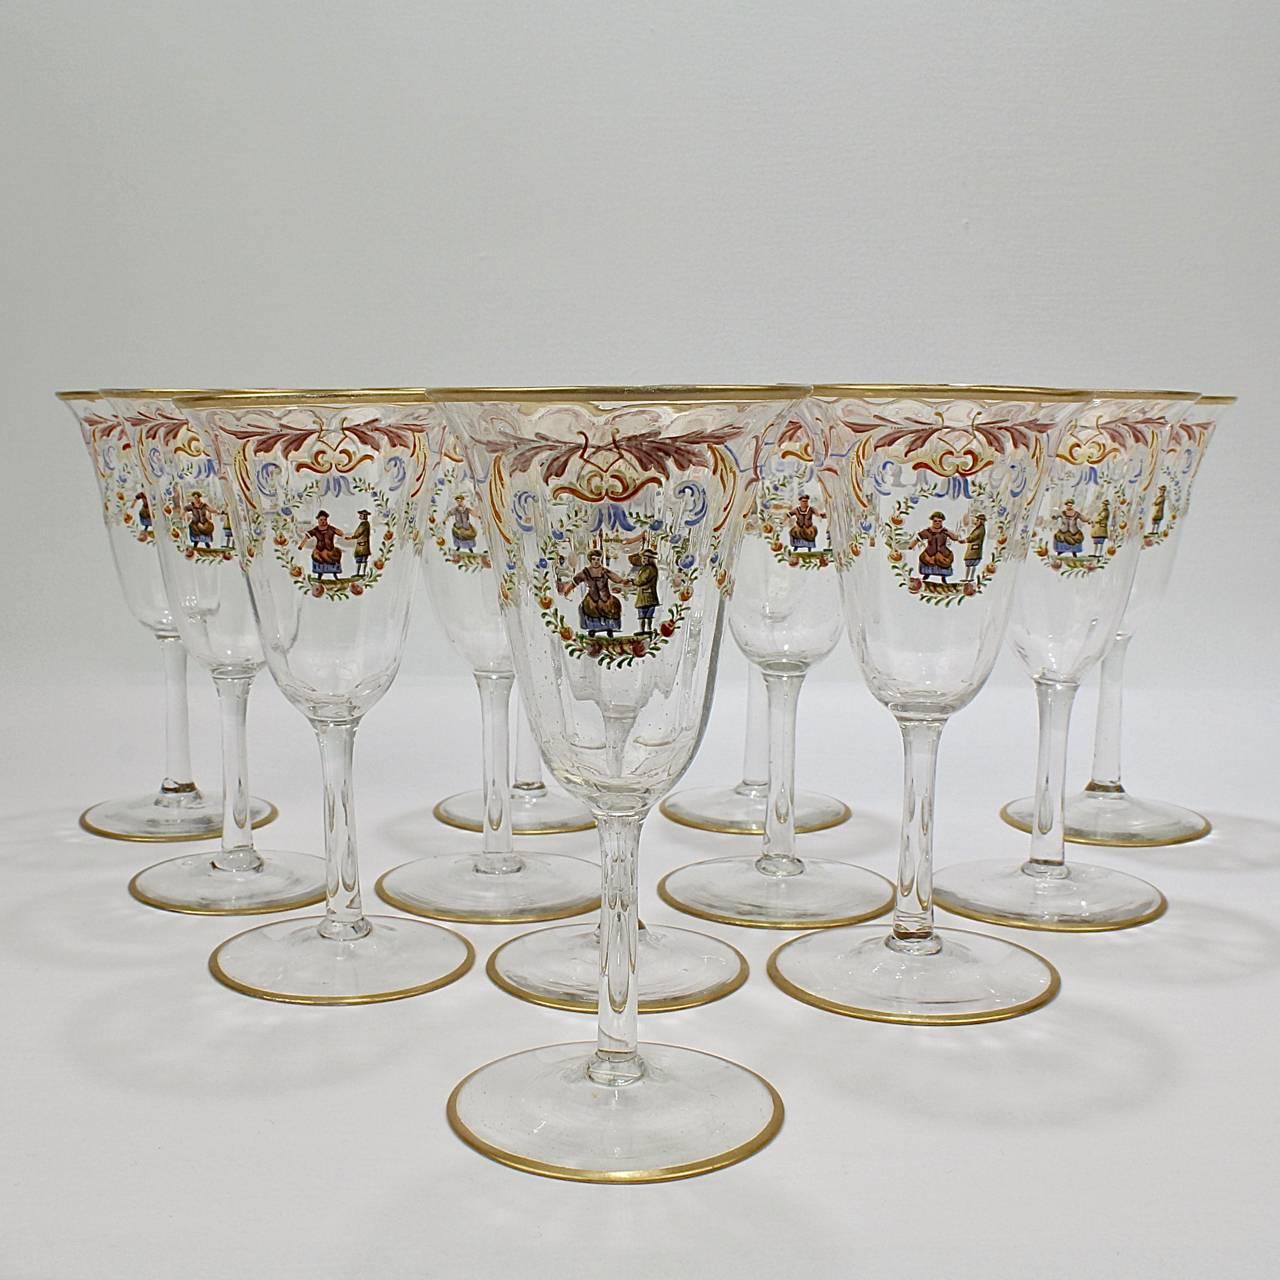 A full set of 12 enameled Italian or Venetian glass white wine glasses. 

With polychrome Florentine enamel decoration, a central cartouche bearing a peasant couple surrounded by a wreath with rose, and gilded feet and rims.

Attributed to